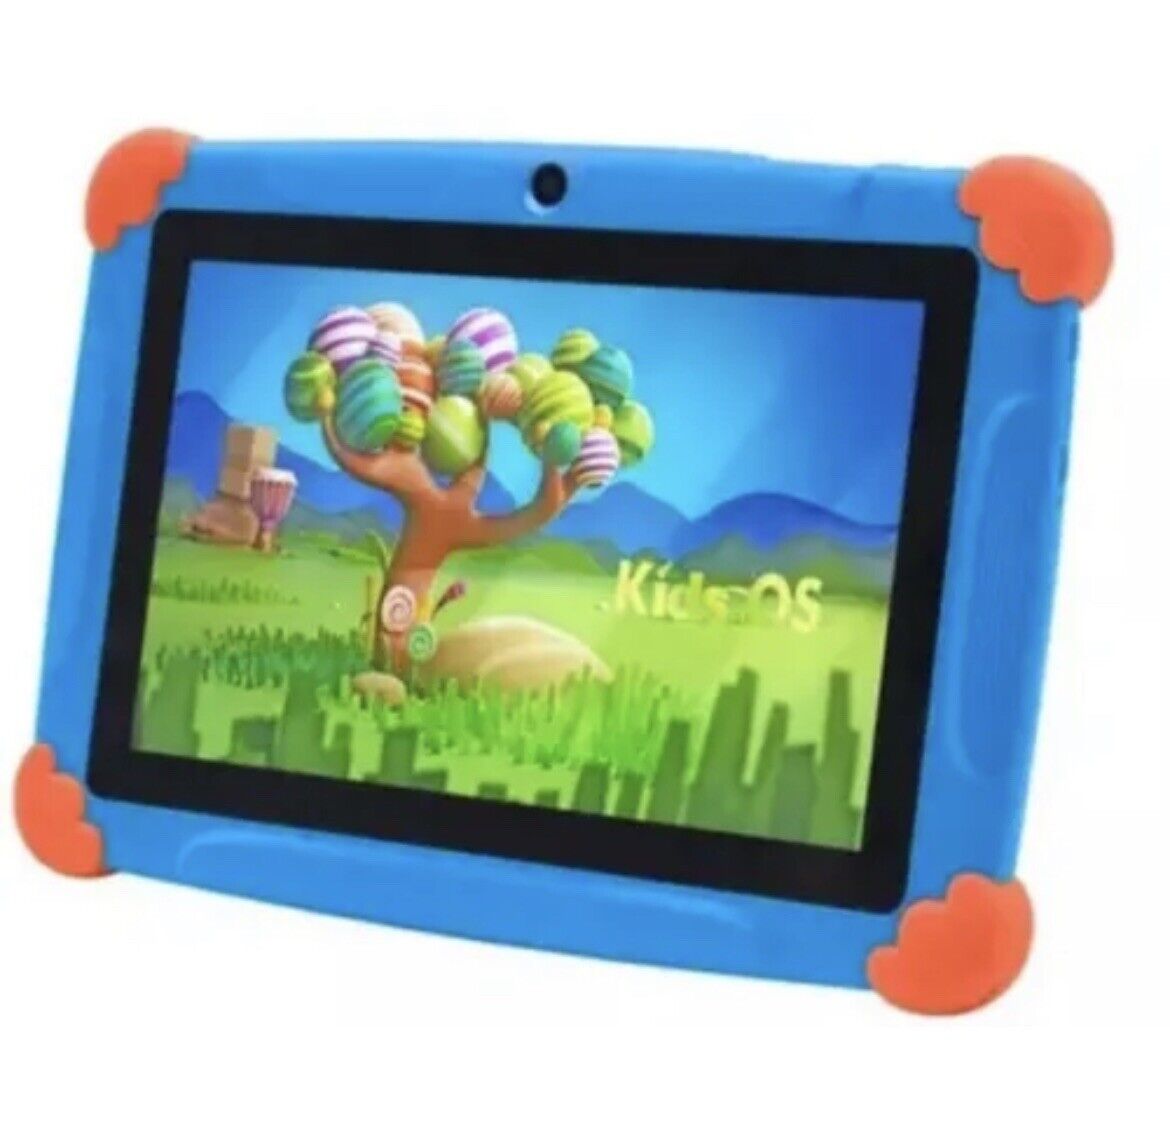 Wintouch kids Education 7 inch Tablet (WITH PARENTAL CONTROL)